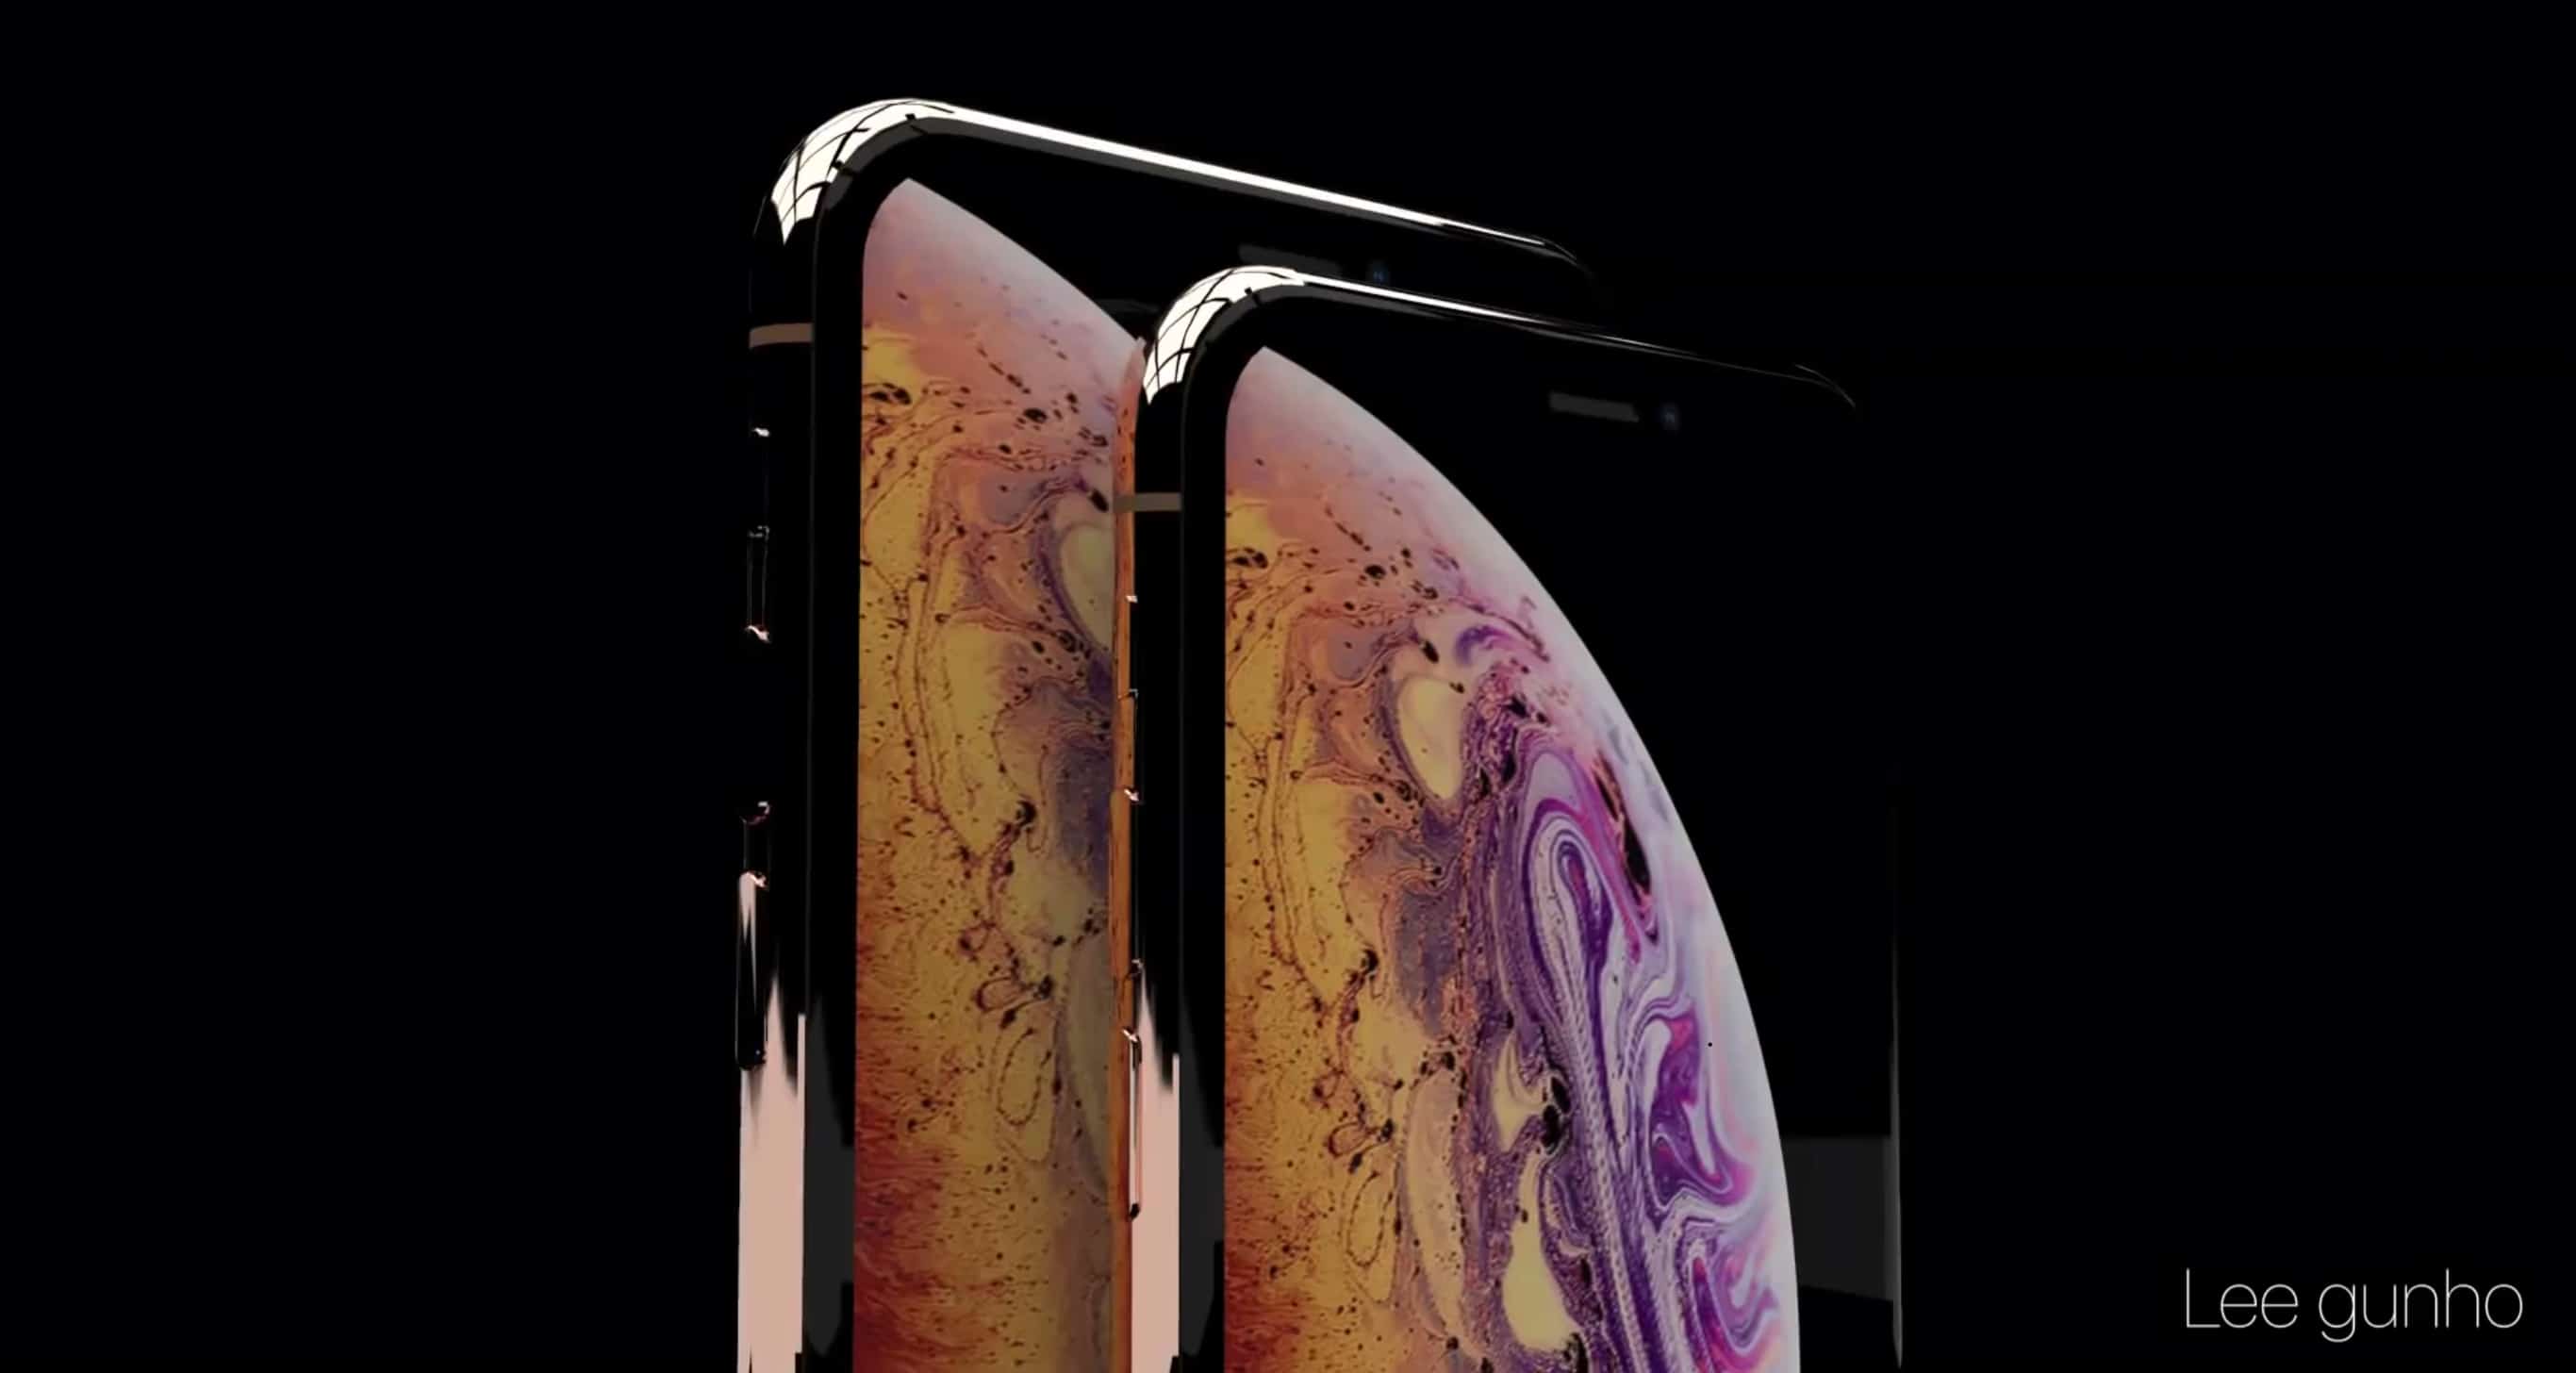 This could be the iPhone XS Plus and iPhone XS, Apple's 2018 iPhone models.